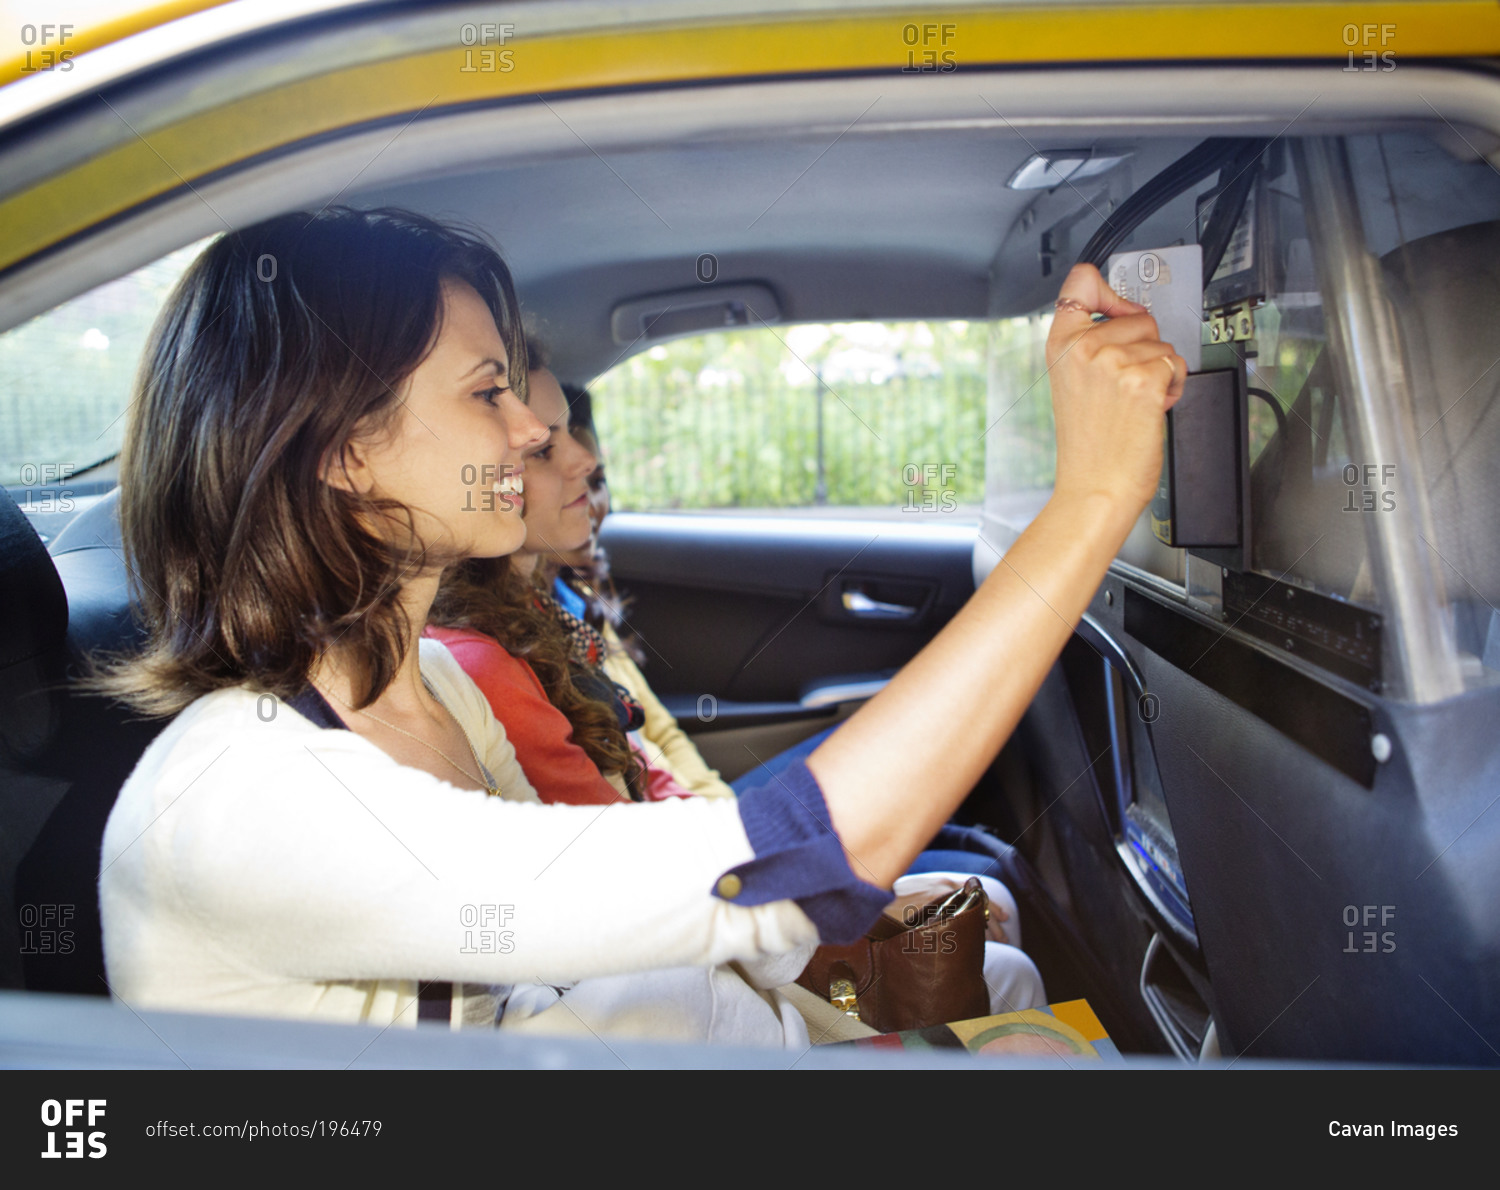 A woman swipes her credit card in the back of a taxi